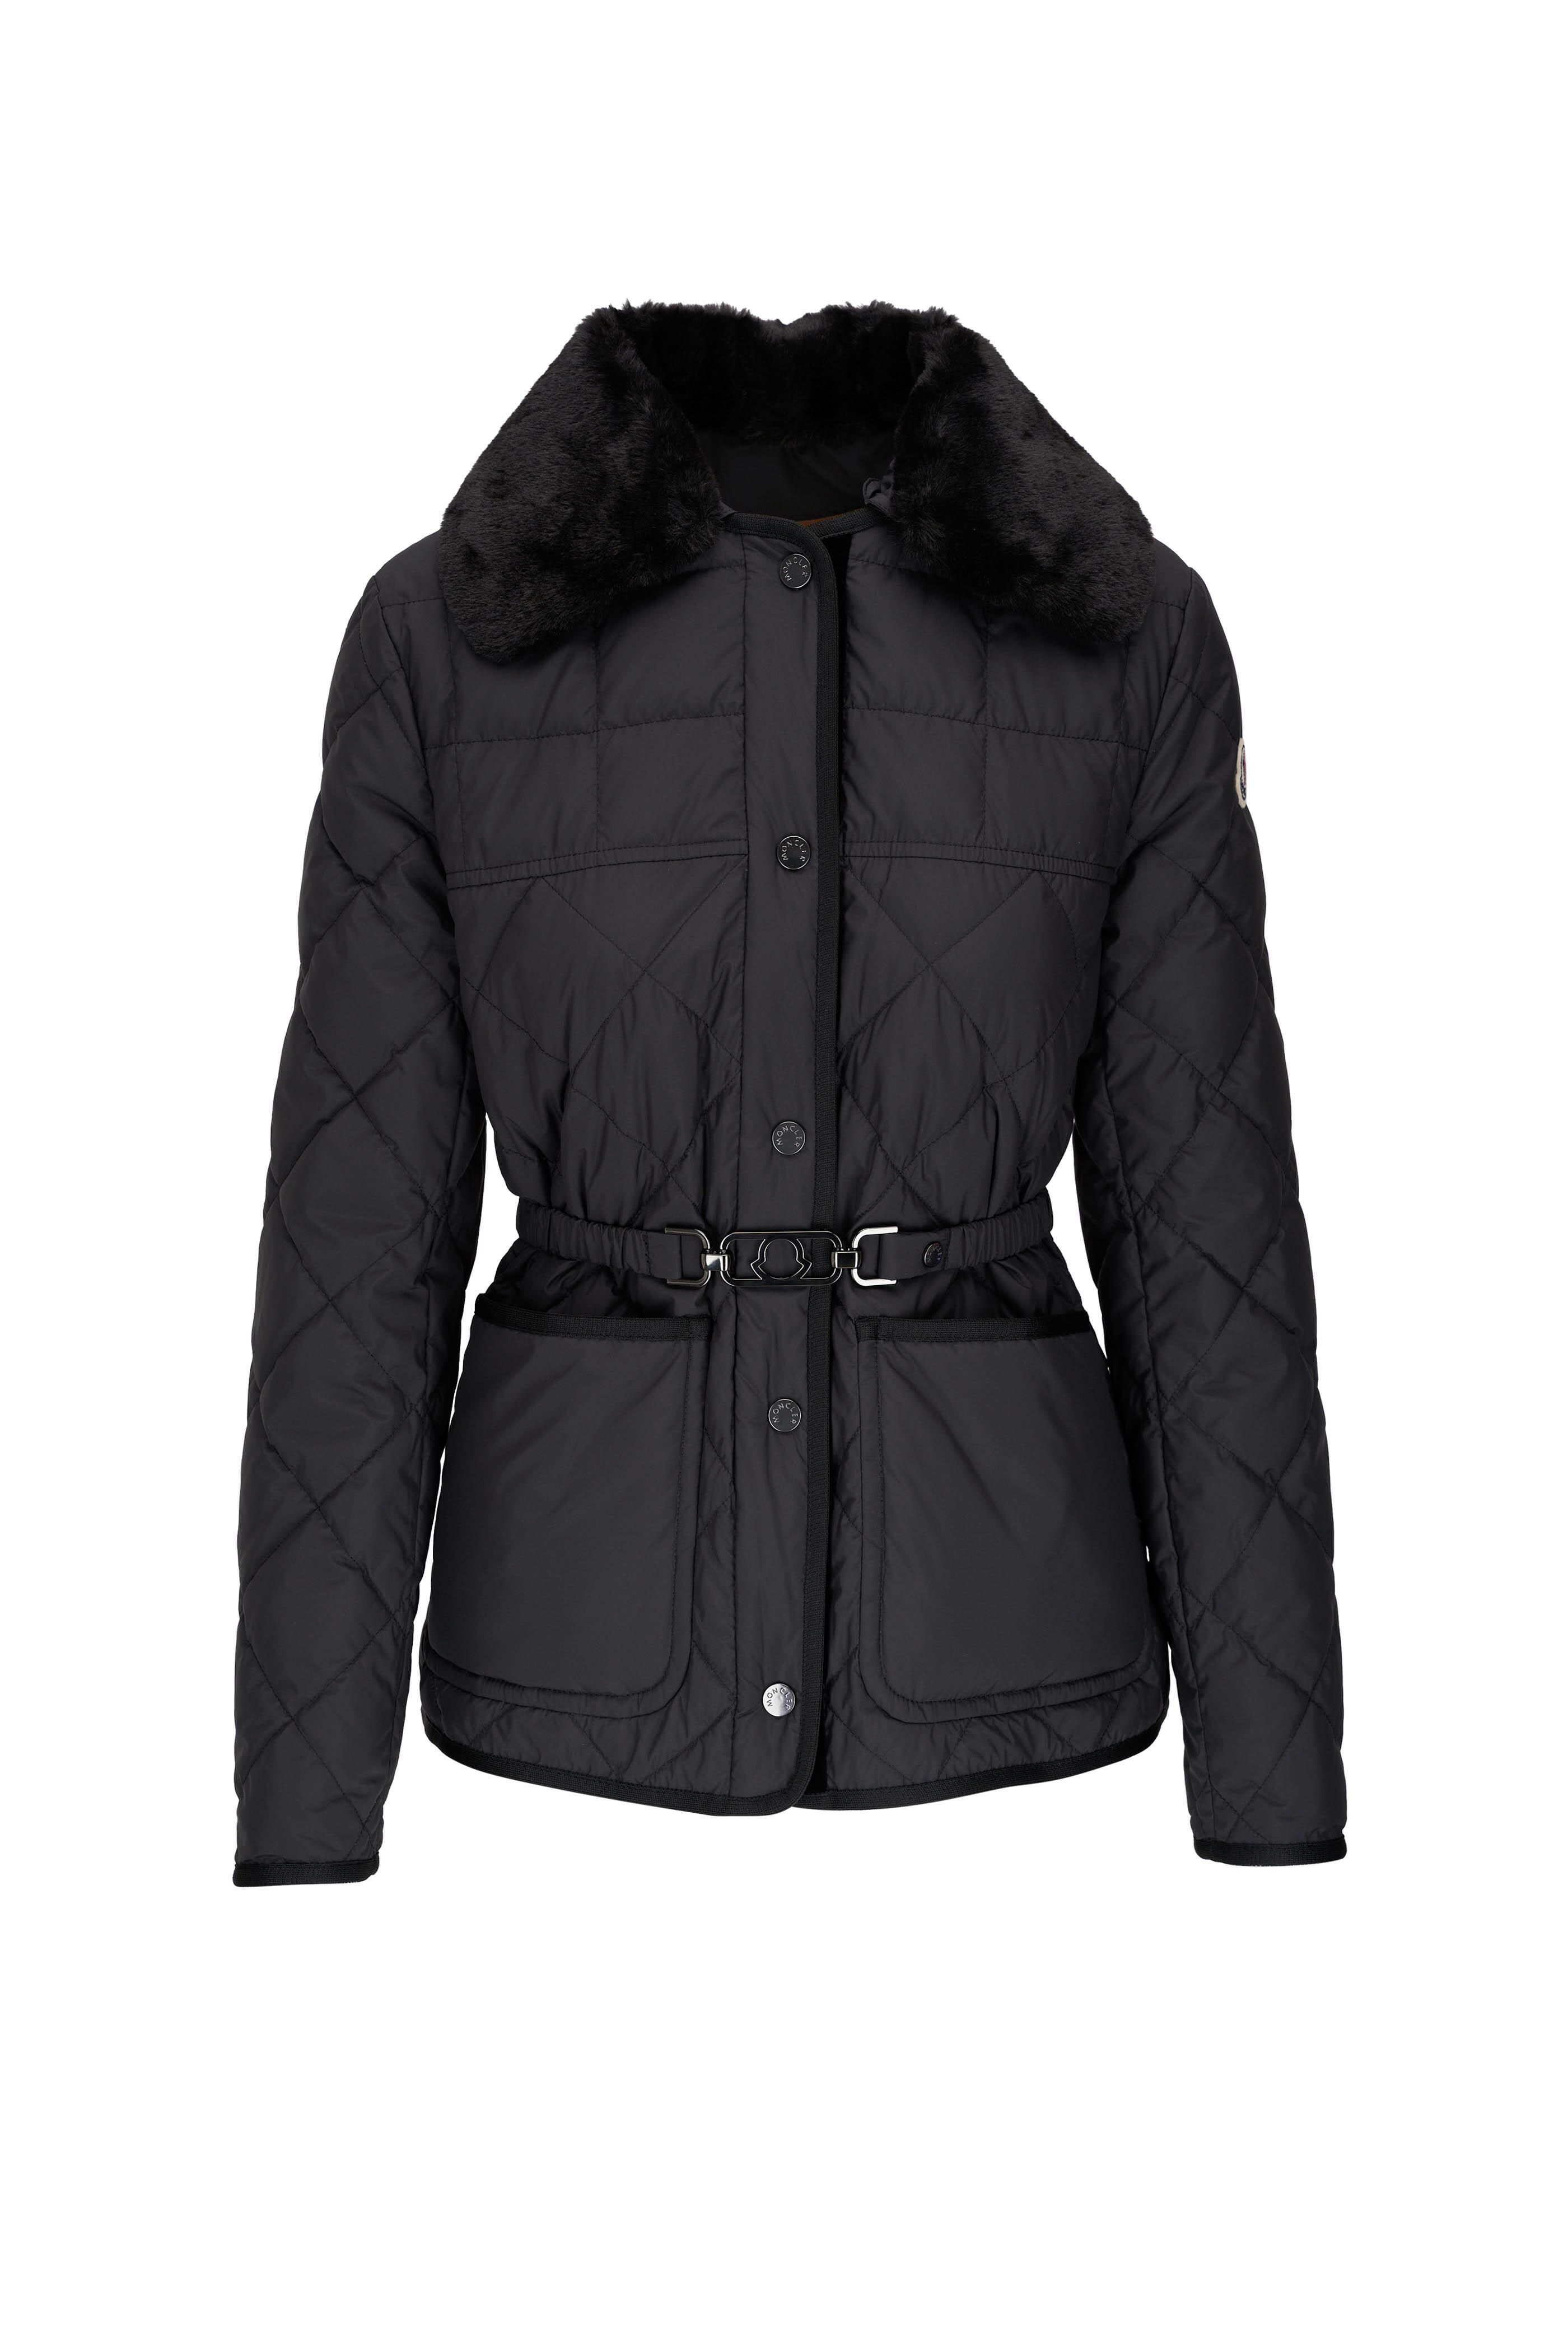 Moncler - Cygne Black Diamond Quilted Down Jacket